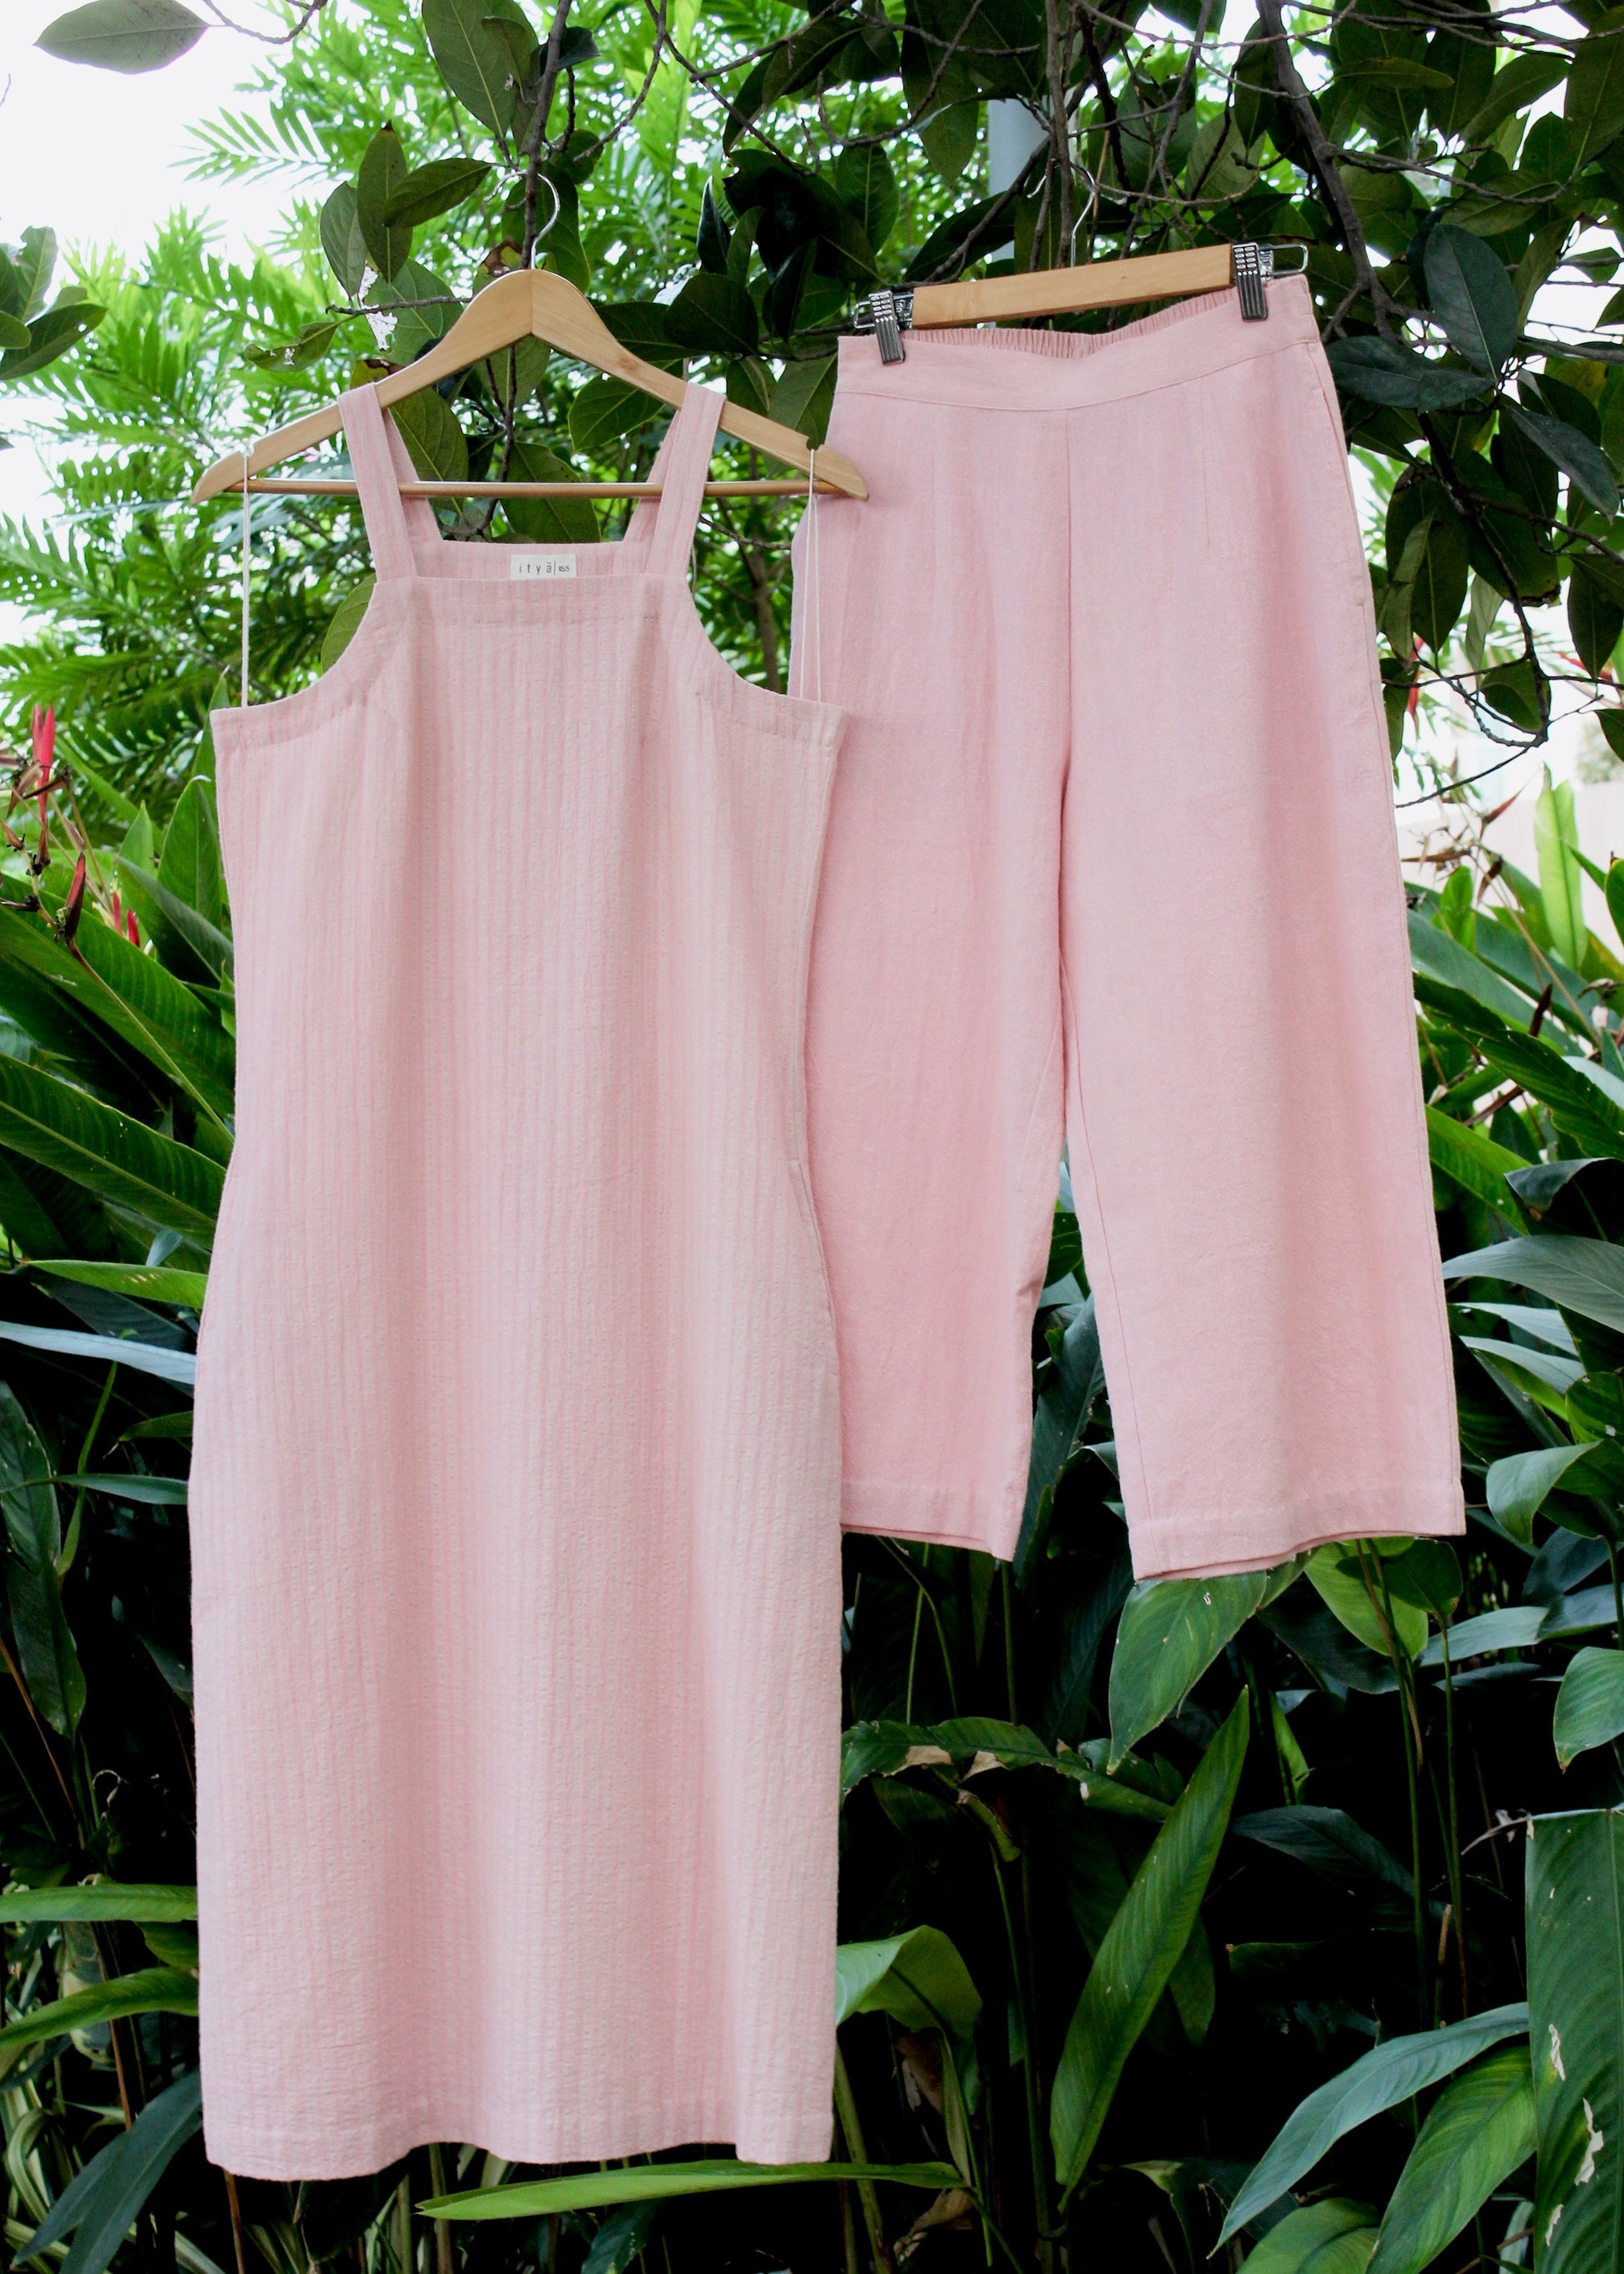 Tulip Top and Blush Pants at Kamakhyaa by Itya. This item is Casual Wear, Co-ord Sets, Hand Spun Cotton, Handwoven cotton, Natural, Office, Office Wear Co-ords, Pastel Perfect, Pastel Perfect by Itya, Pink, Plant Dye, Relaxed Fit, SS22, Textured, Womenswear